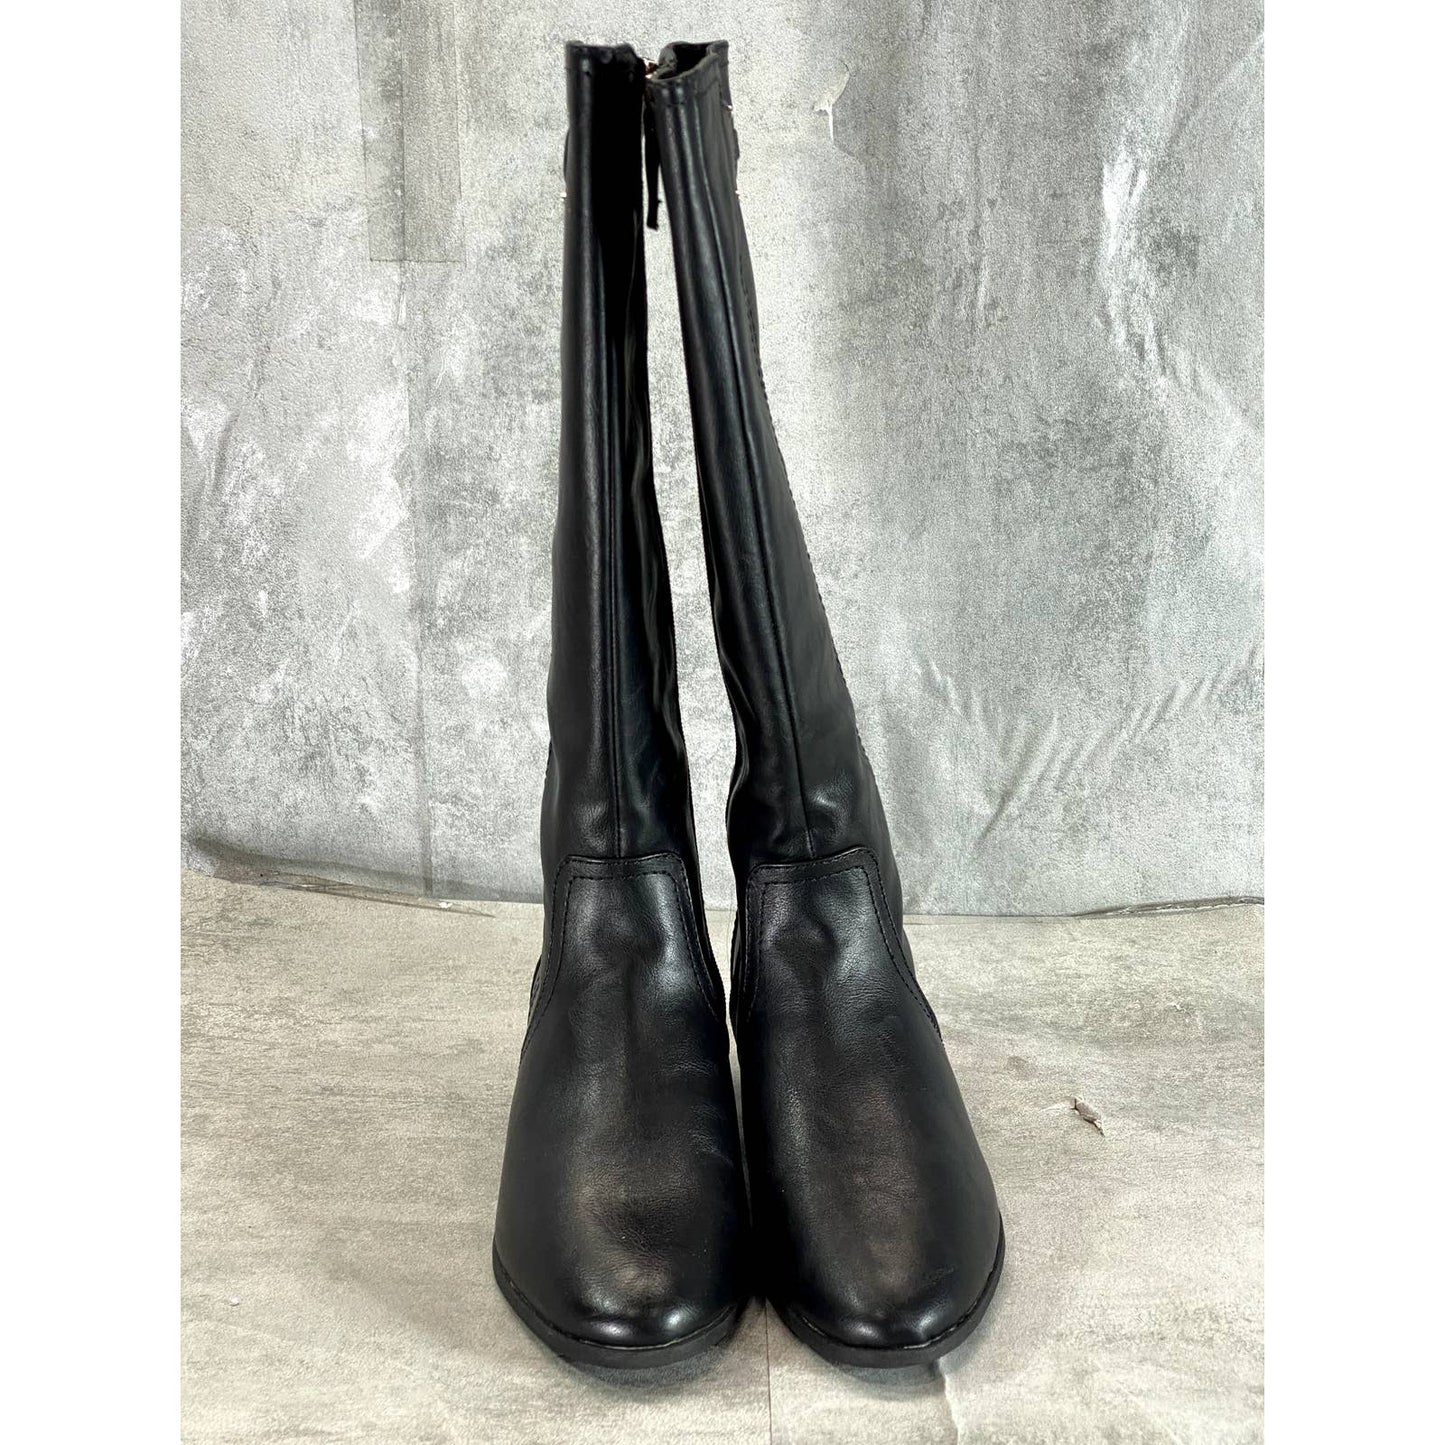 DR. SCHOLL'S Women's Black Faux-Leather Brilliance Round-Toe Knee-High Boots SZ7